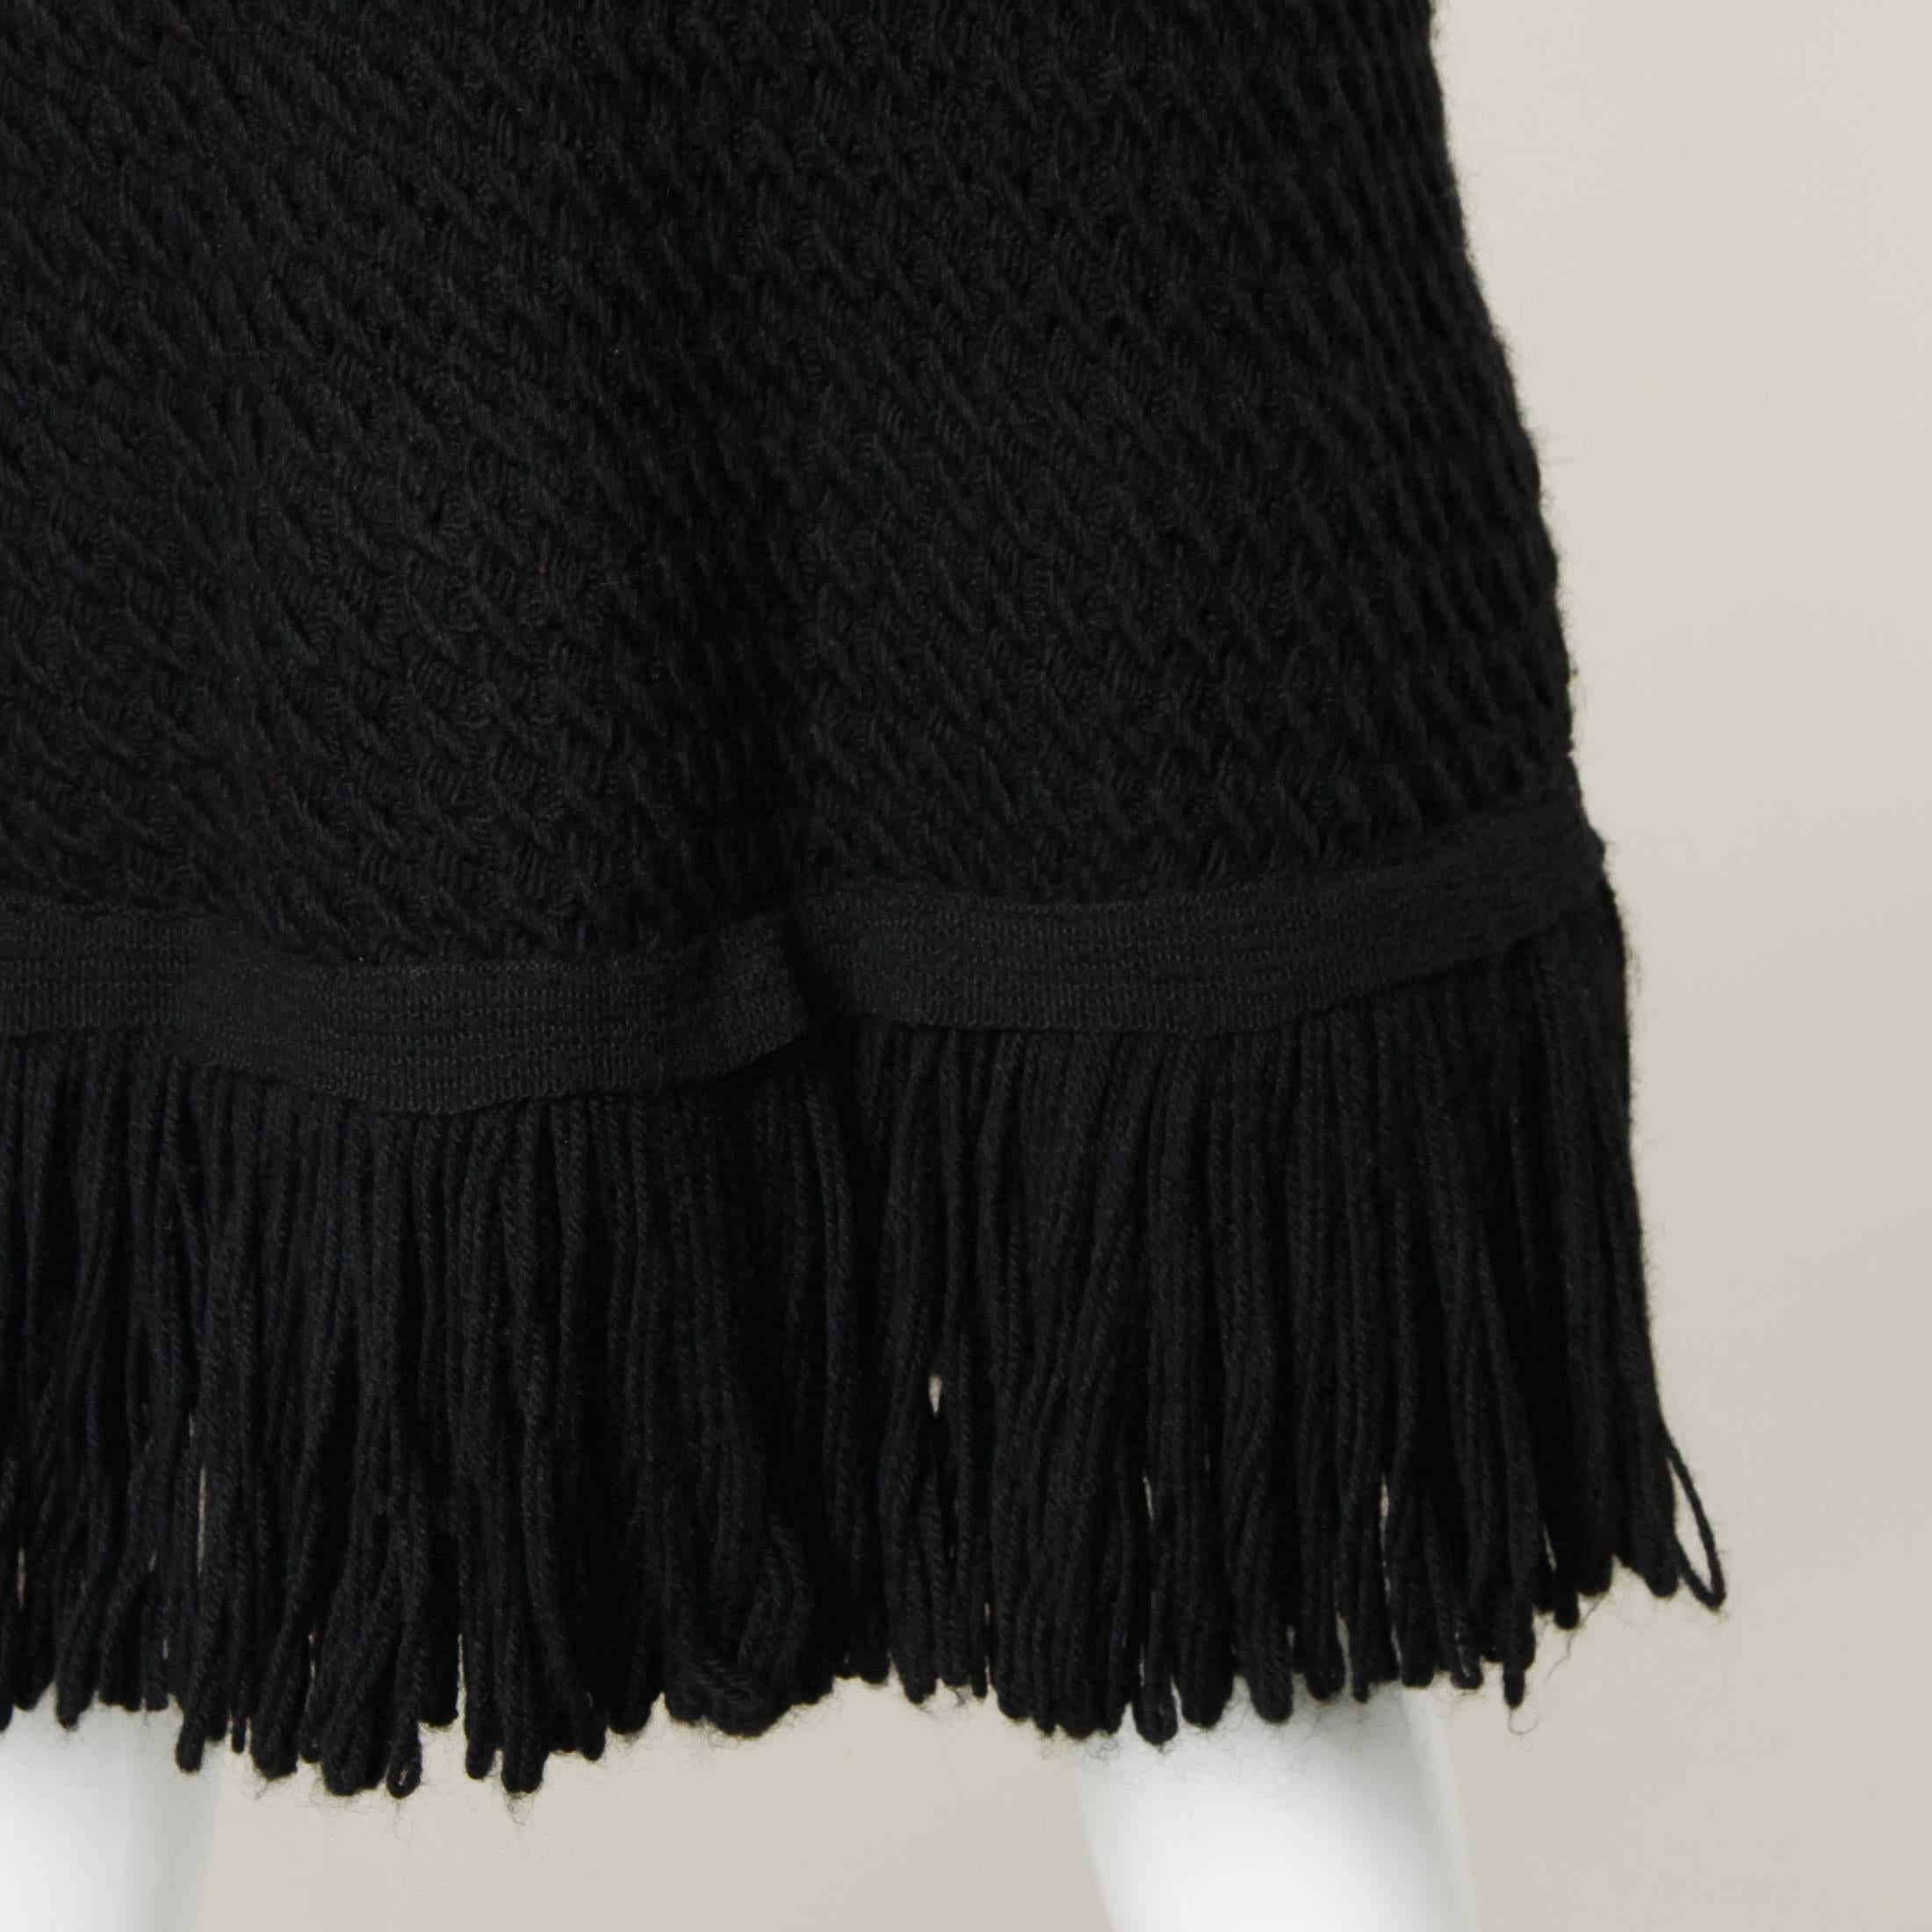 Cardinali Black Wool and Silk Couture Crochet Dress with Fringe Trim, 1960s 3